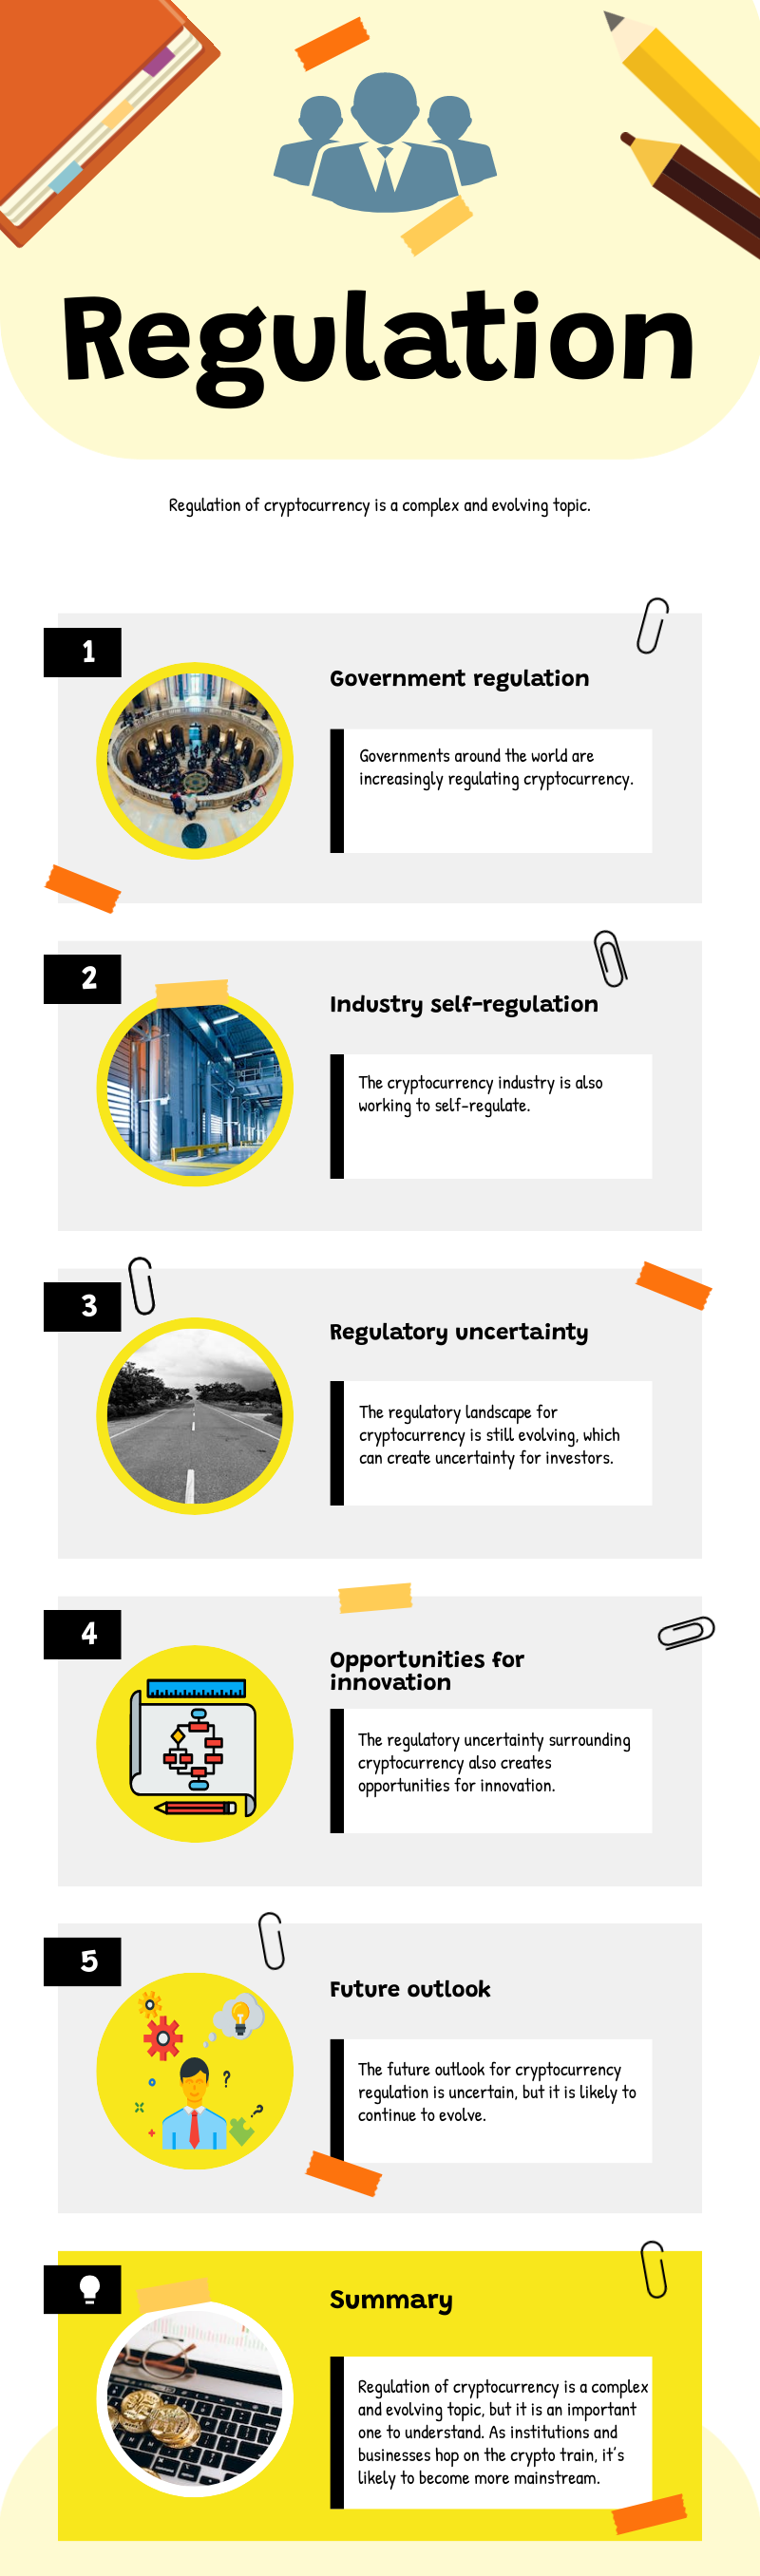 An infographic titled "Regulation" discussing the regulation of cryptocurrency. It covers five key points: Government regulation, with a picture of a government assembly; Industry self-regulation, with an image of server racks; Regulatory uncertainty, represented by a foggy road; Opportunities for innovation, illustrated with a circuit diagram; and Future outlook, depicted with a thought bubble containing question marks and gears.